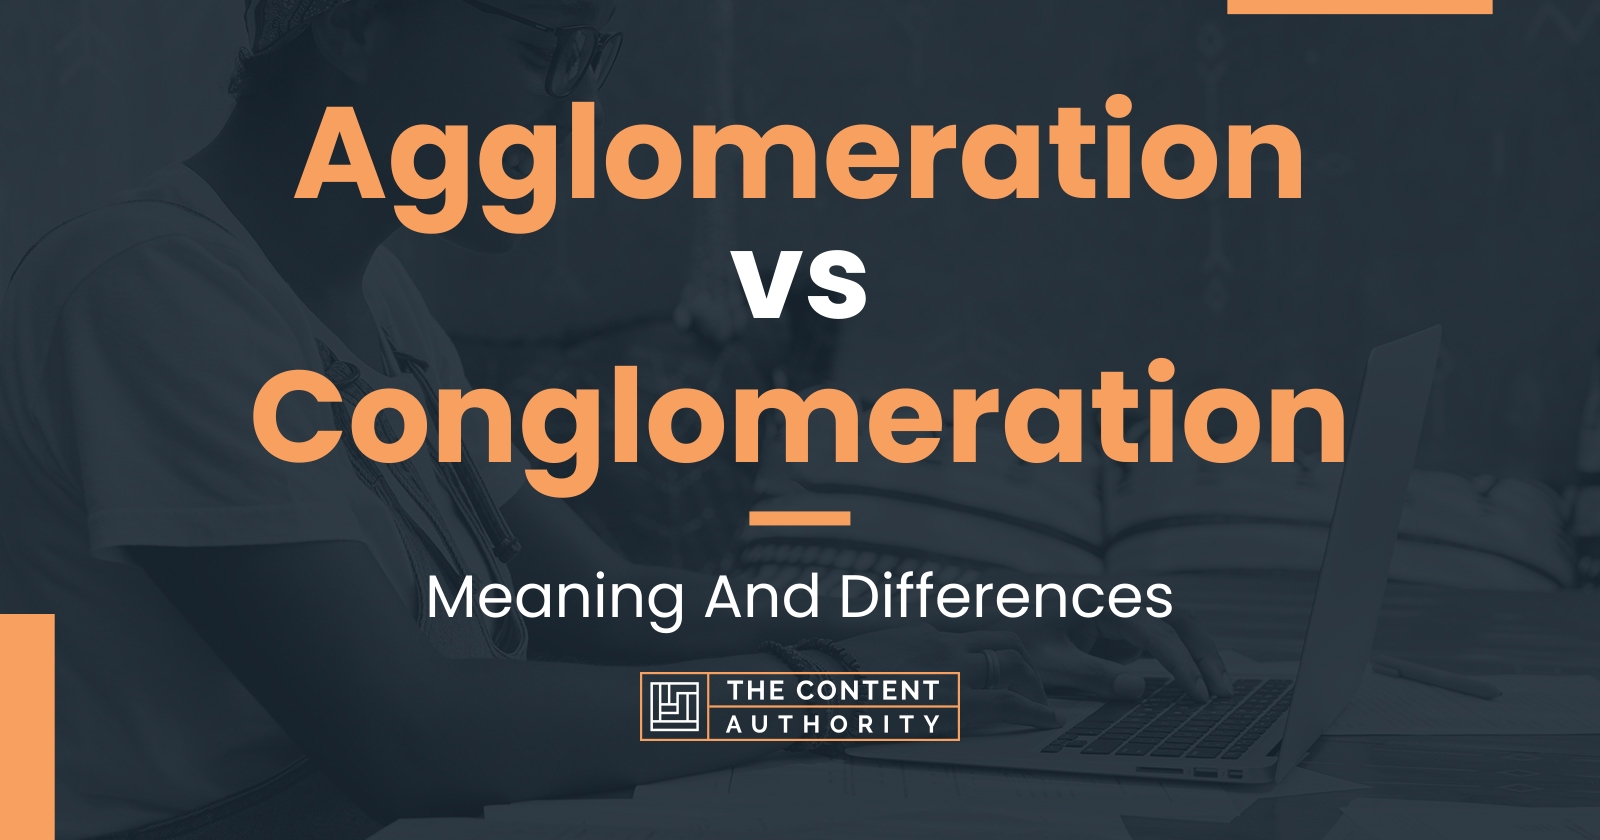 Agglomeration vs Conglomeration: Meaning And Differences